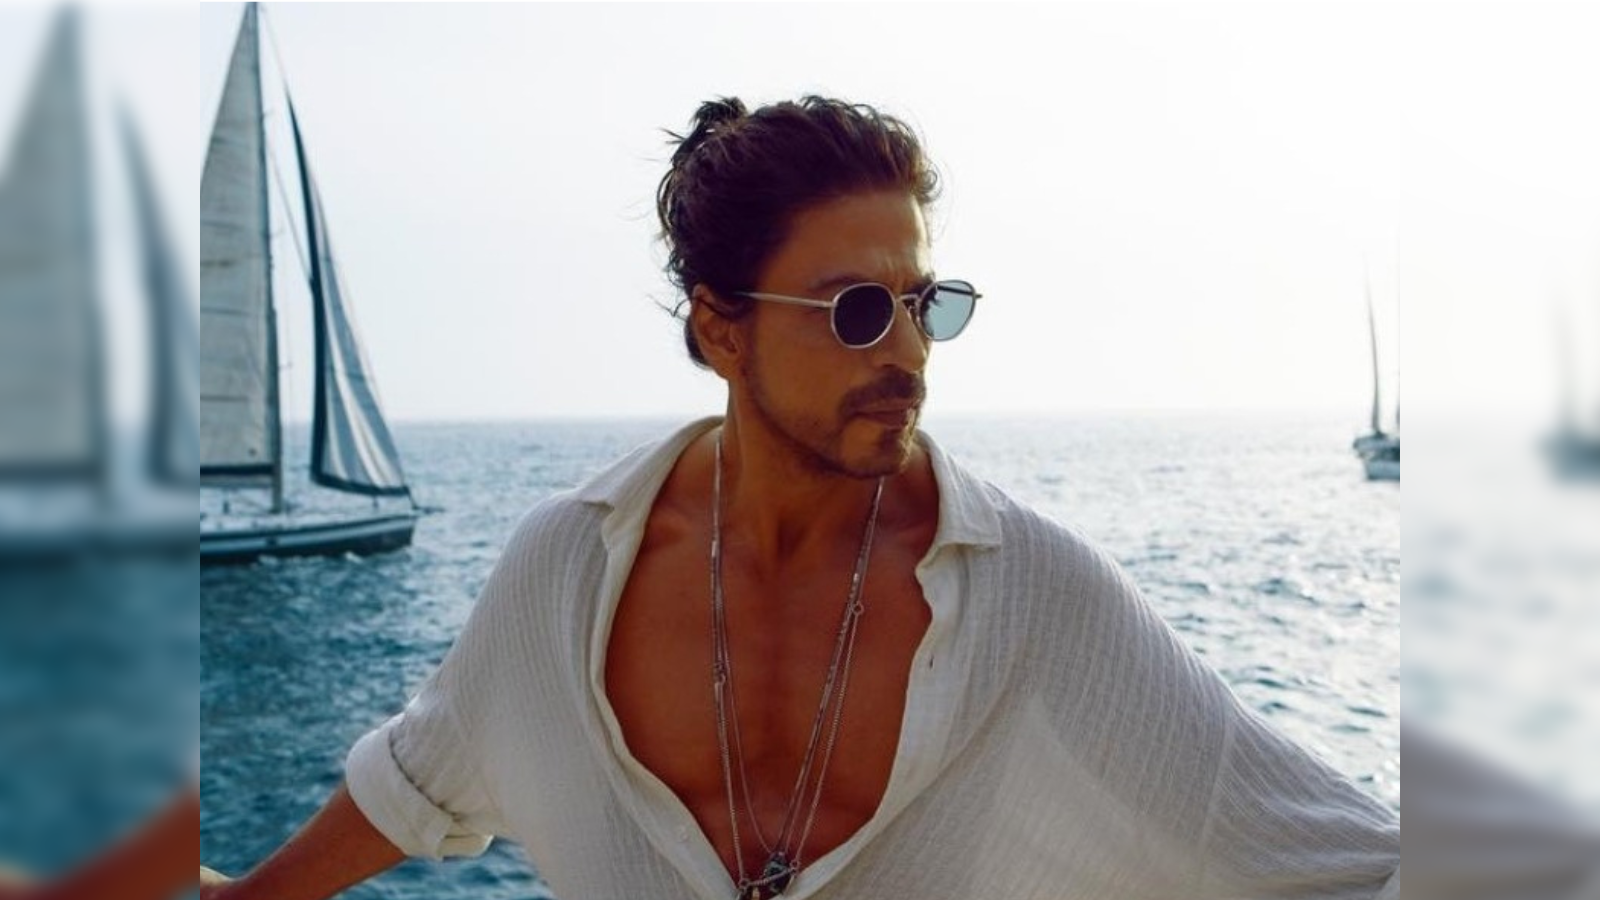 10 times Shah Rukh Khan's iconic pose made our hearts skip a beat | Times  of India